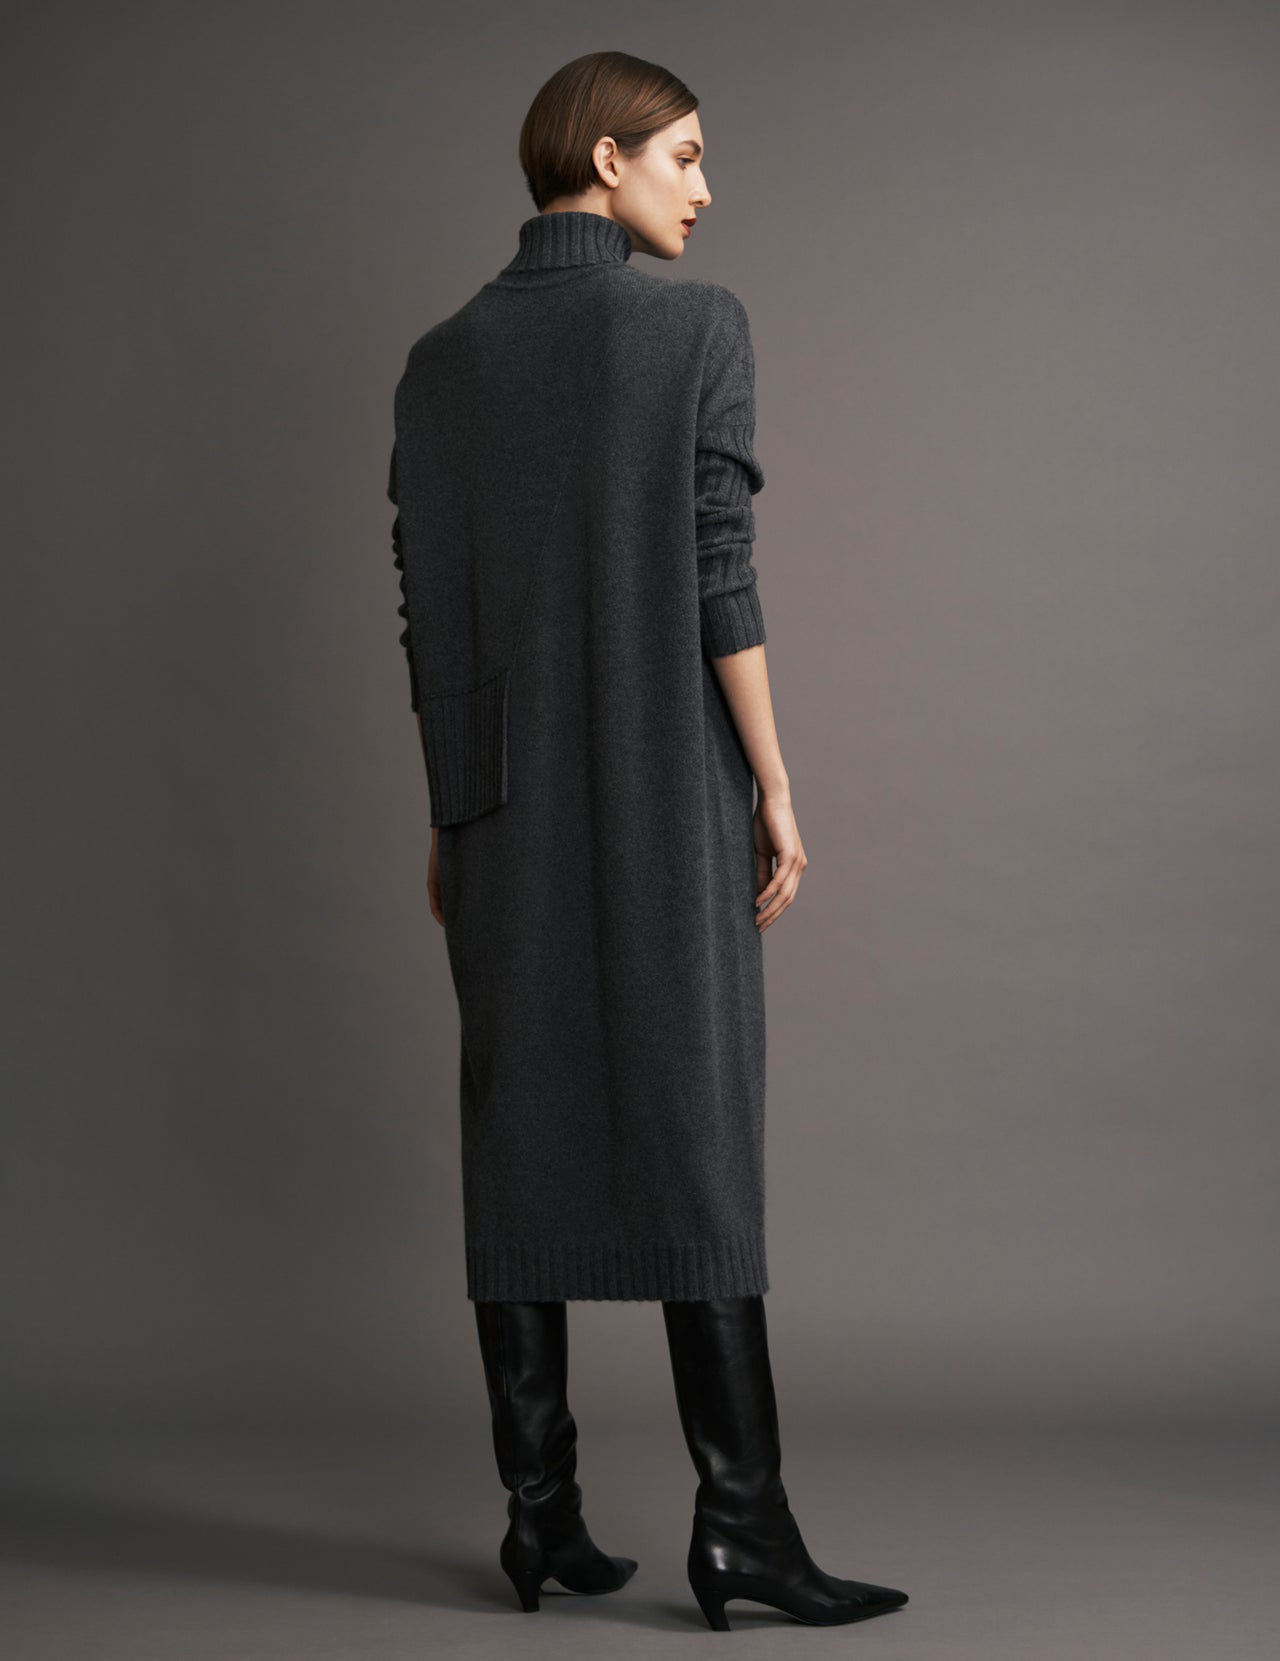  Flannel Grey Roll Neck Pleated Cashmere Dress  